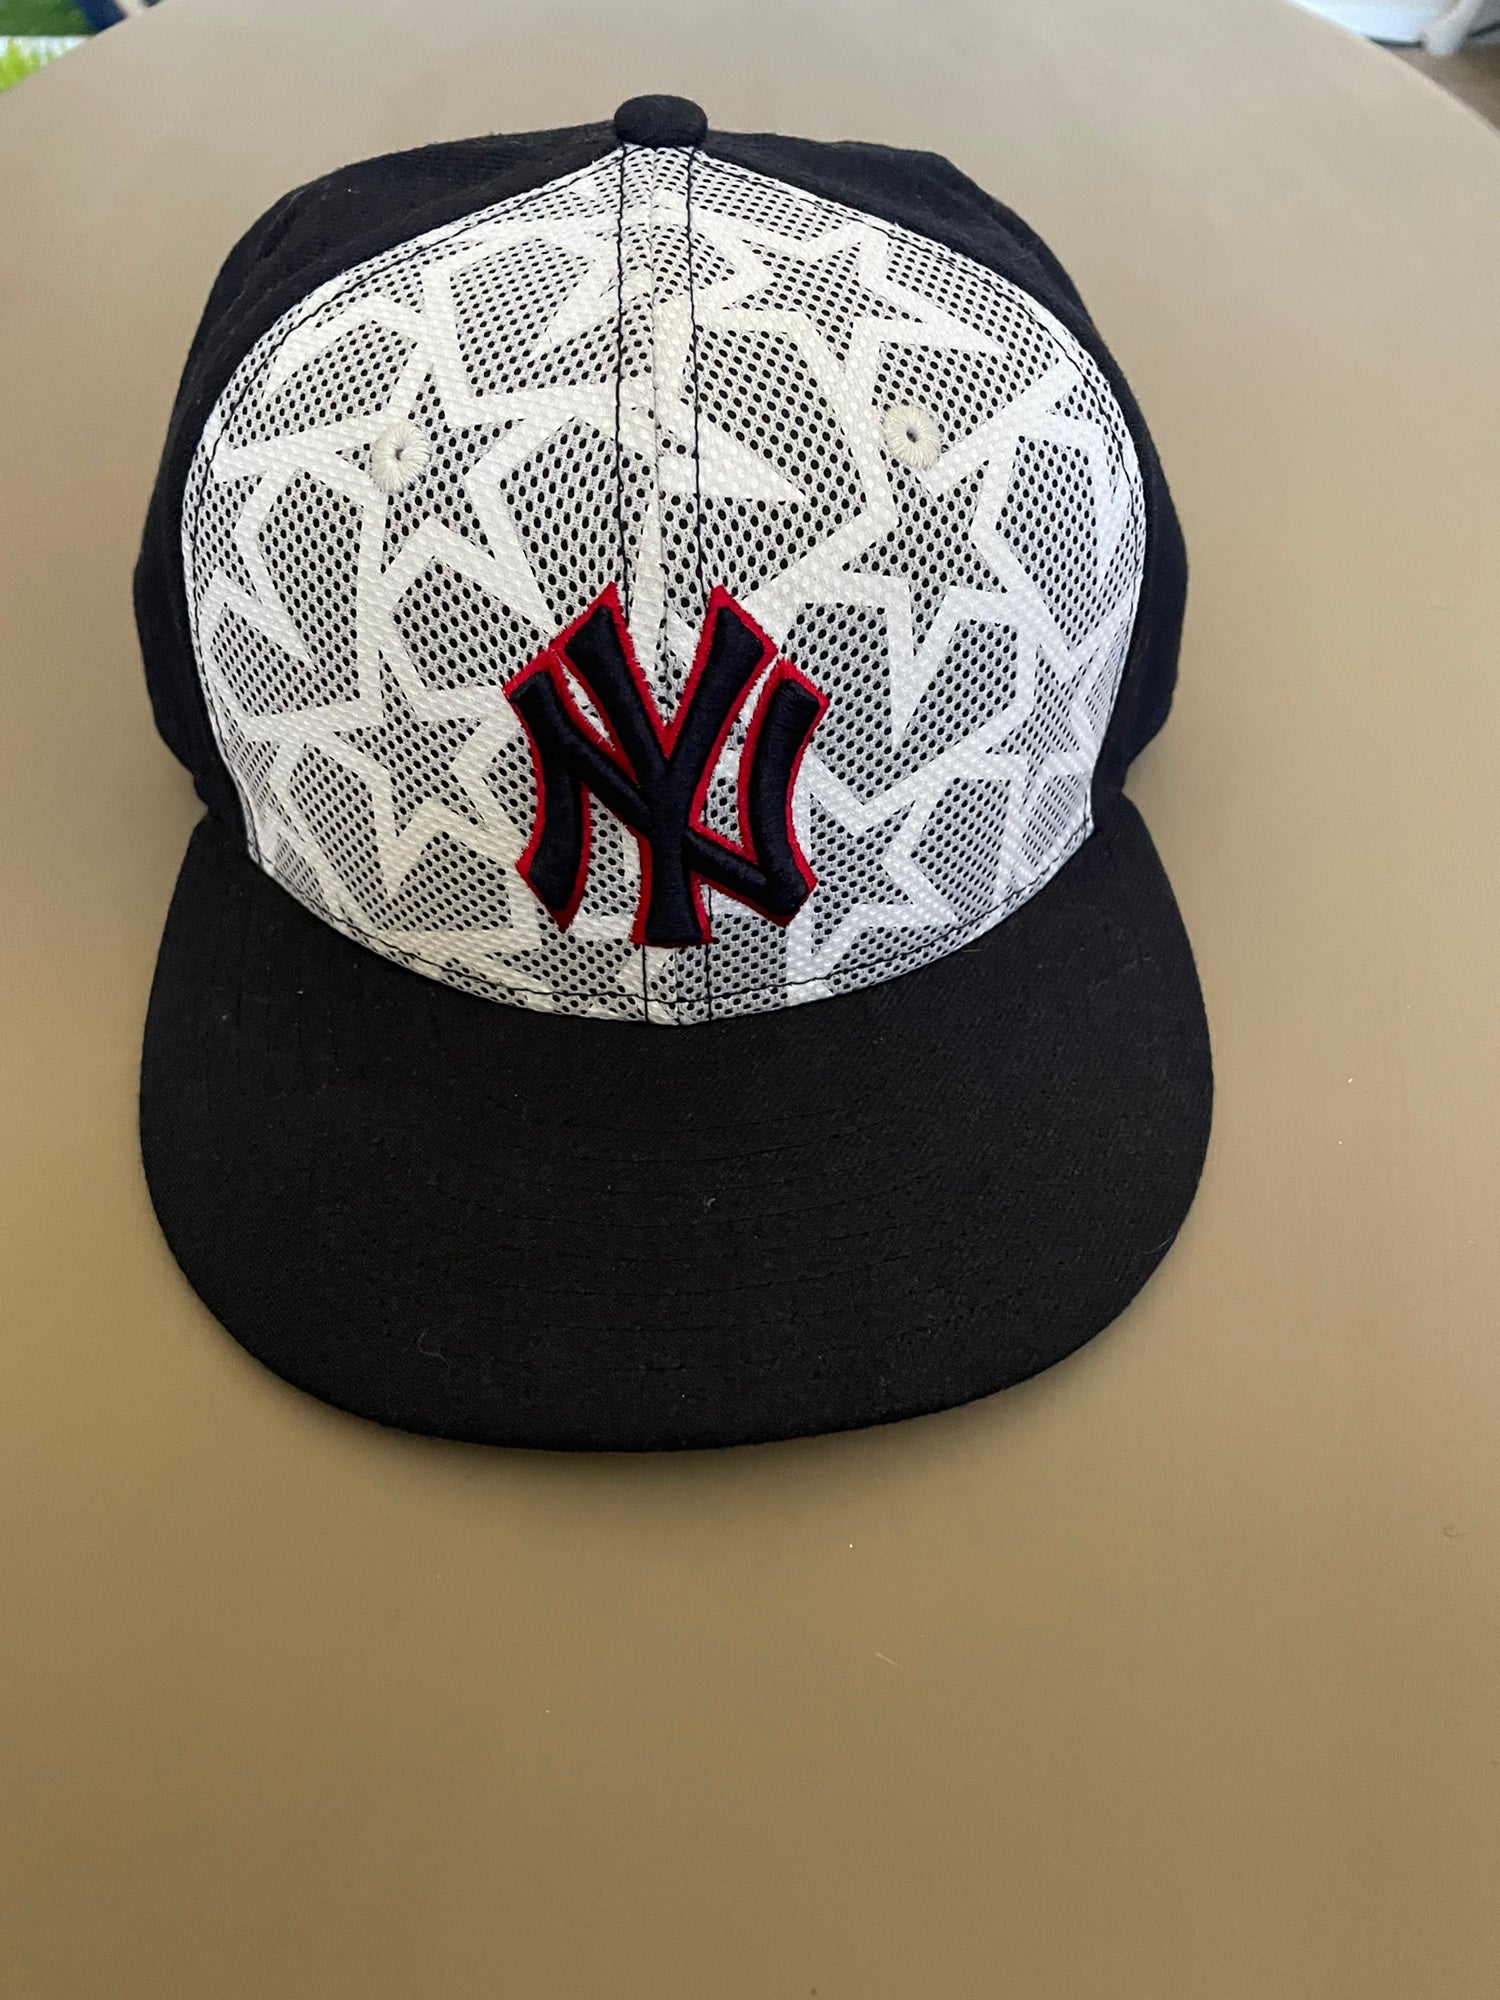 New York Yankees - Happy 4th of July, Yankees fans!